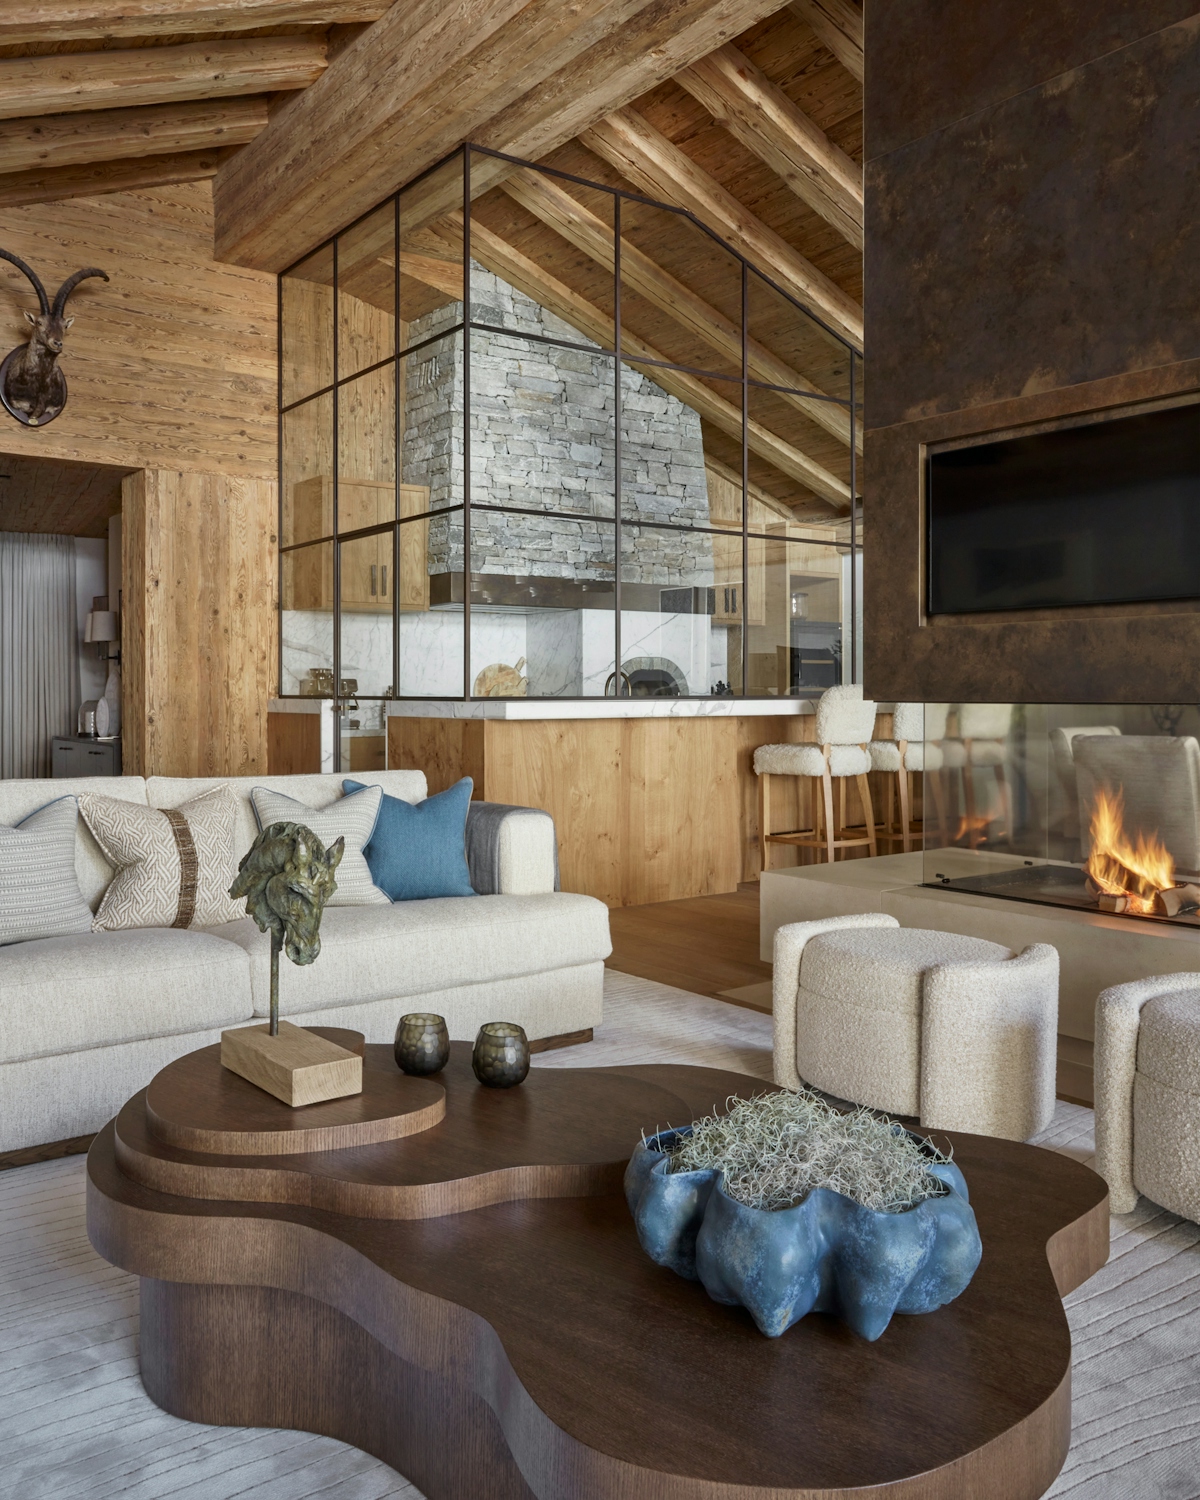 Katharine Pooley designed ski chalet with a large open fireplace, abstract wooden coffee table and large crittal windows